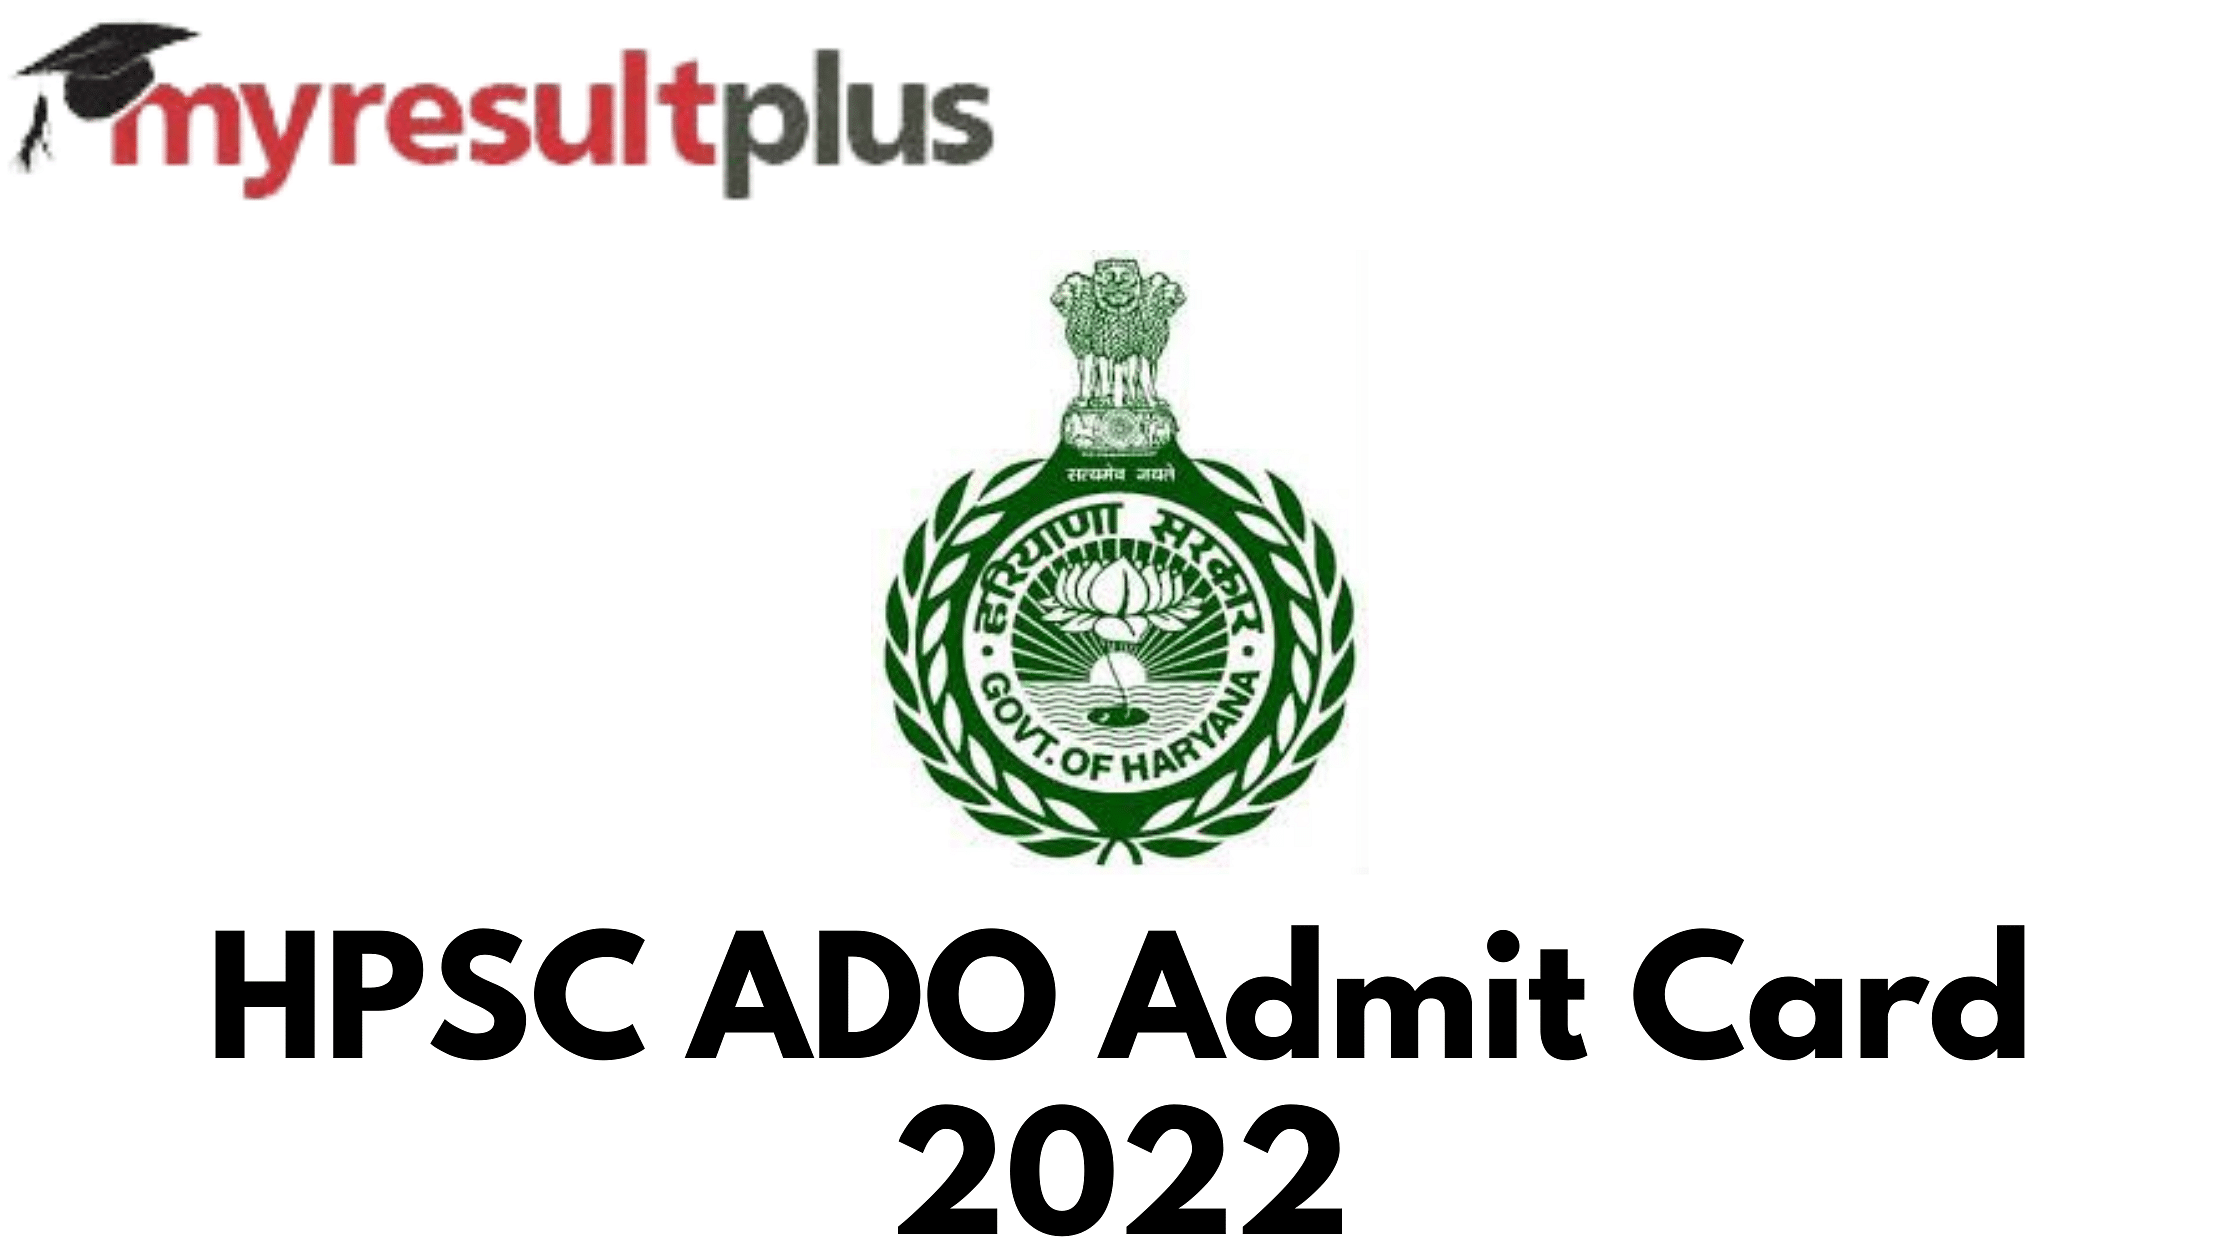 HPSC ADO Admit Card 2022 Out, Know How to Download Here